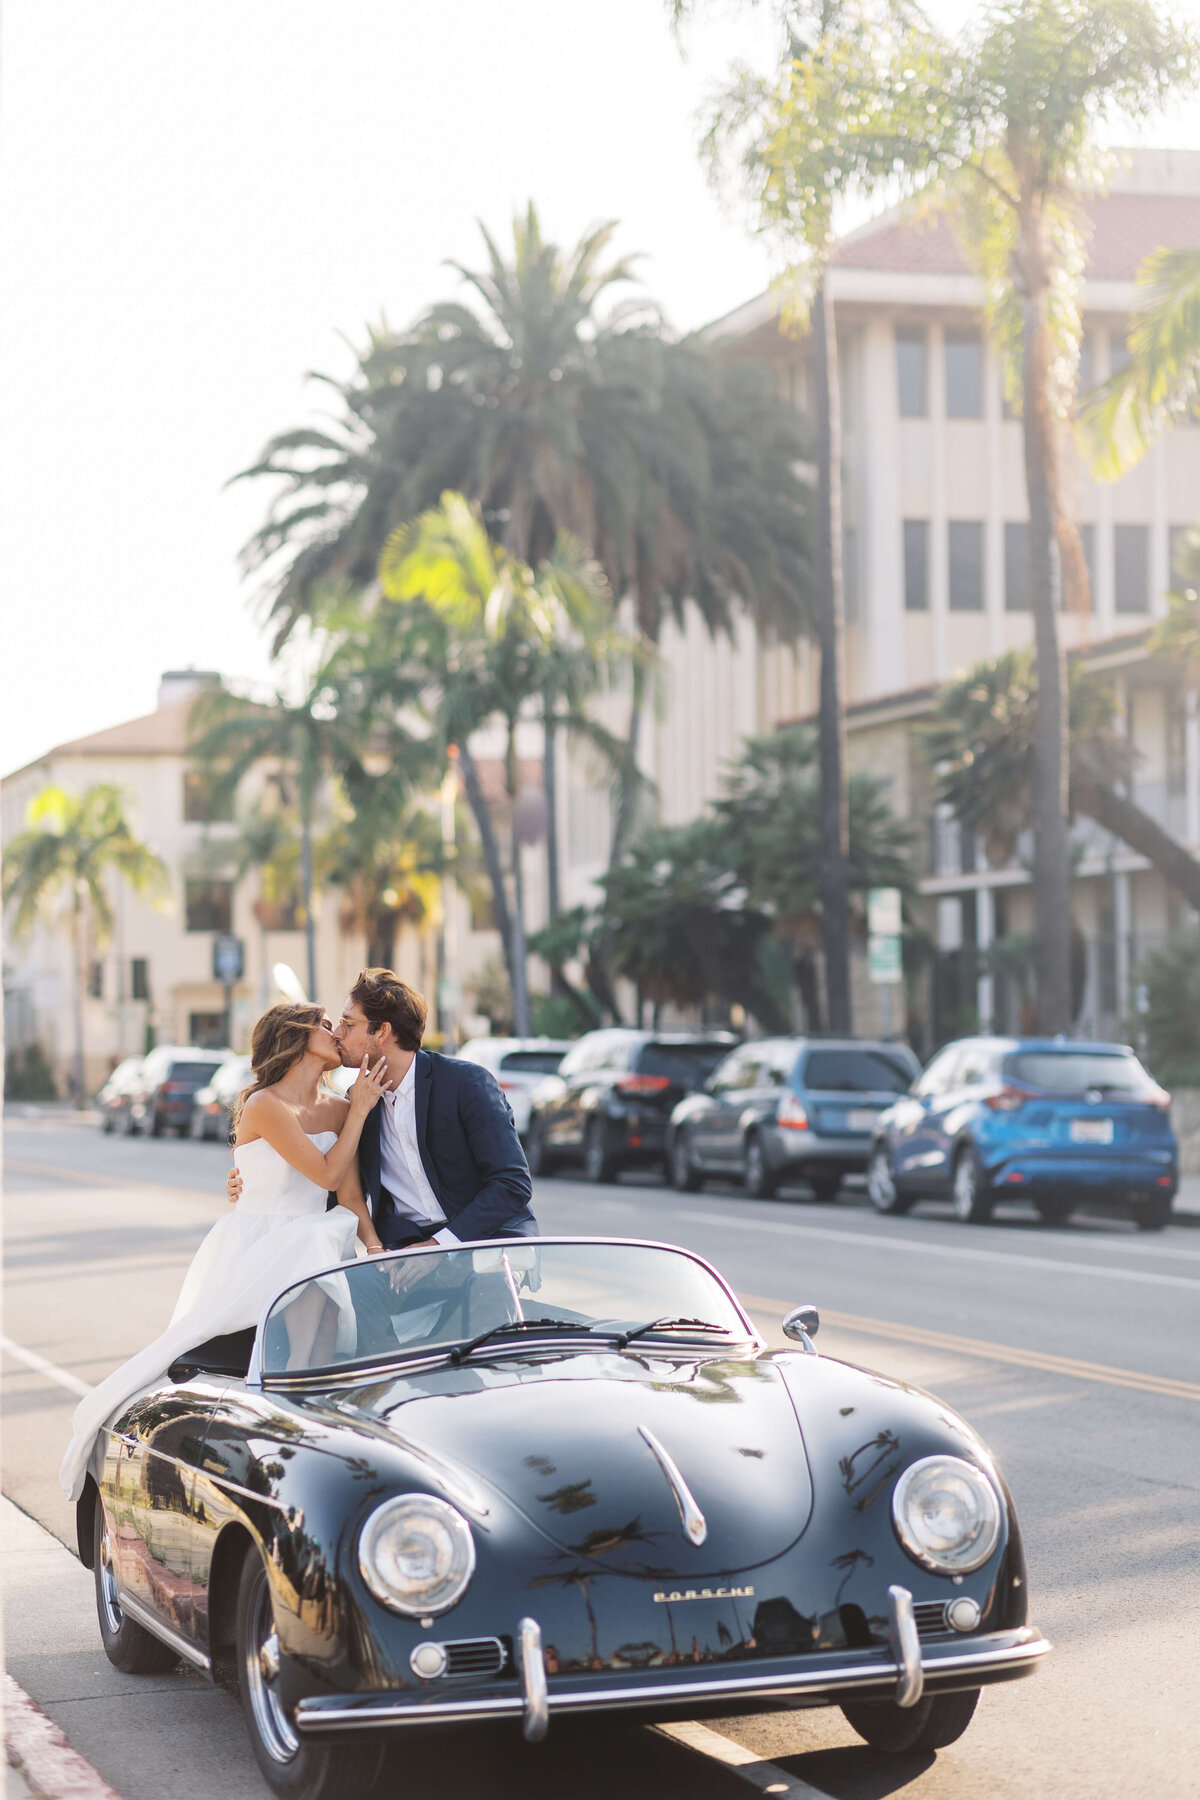 Couple kisses in the back of a vintage convertible Porsche.